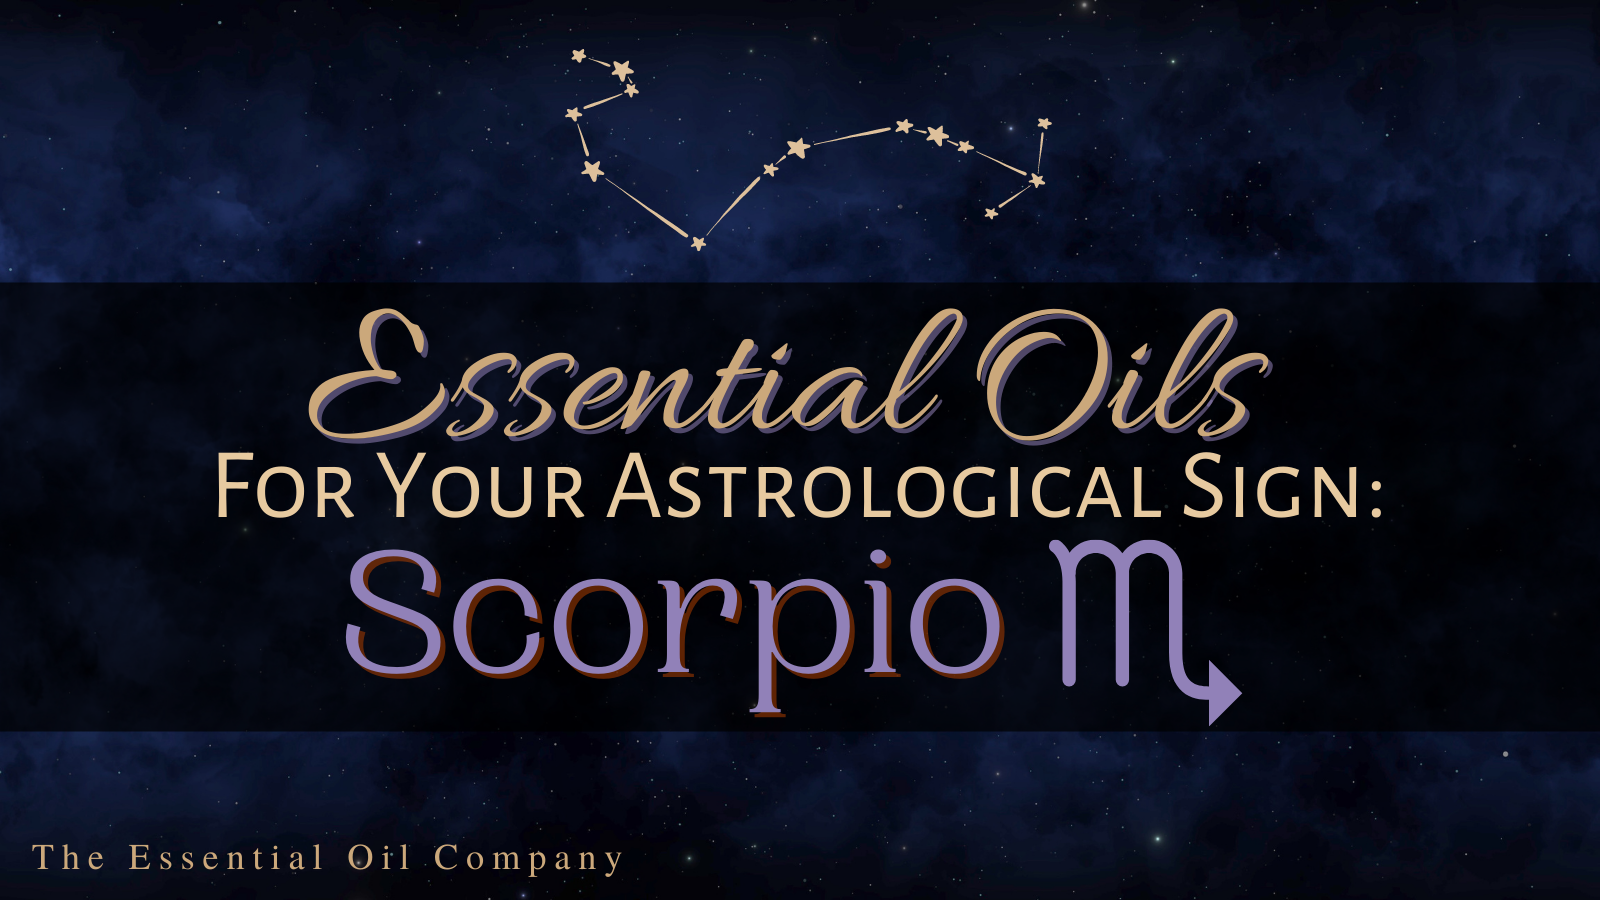 Essential Oils for Your Astrological Sign: Scorpio